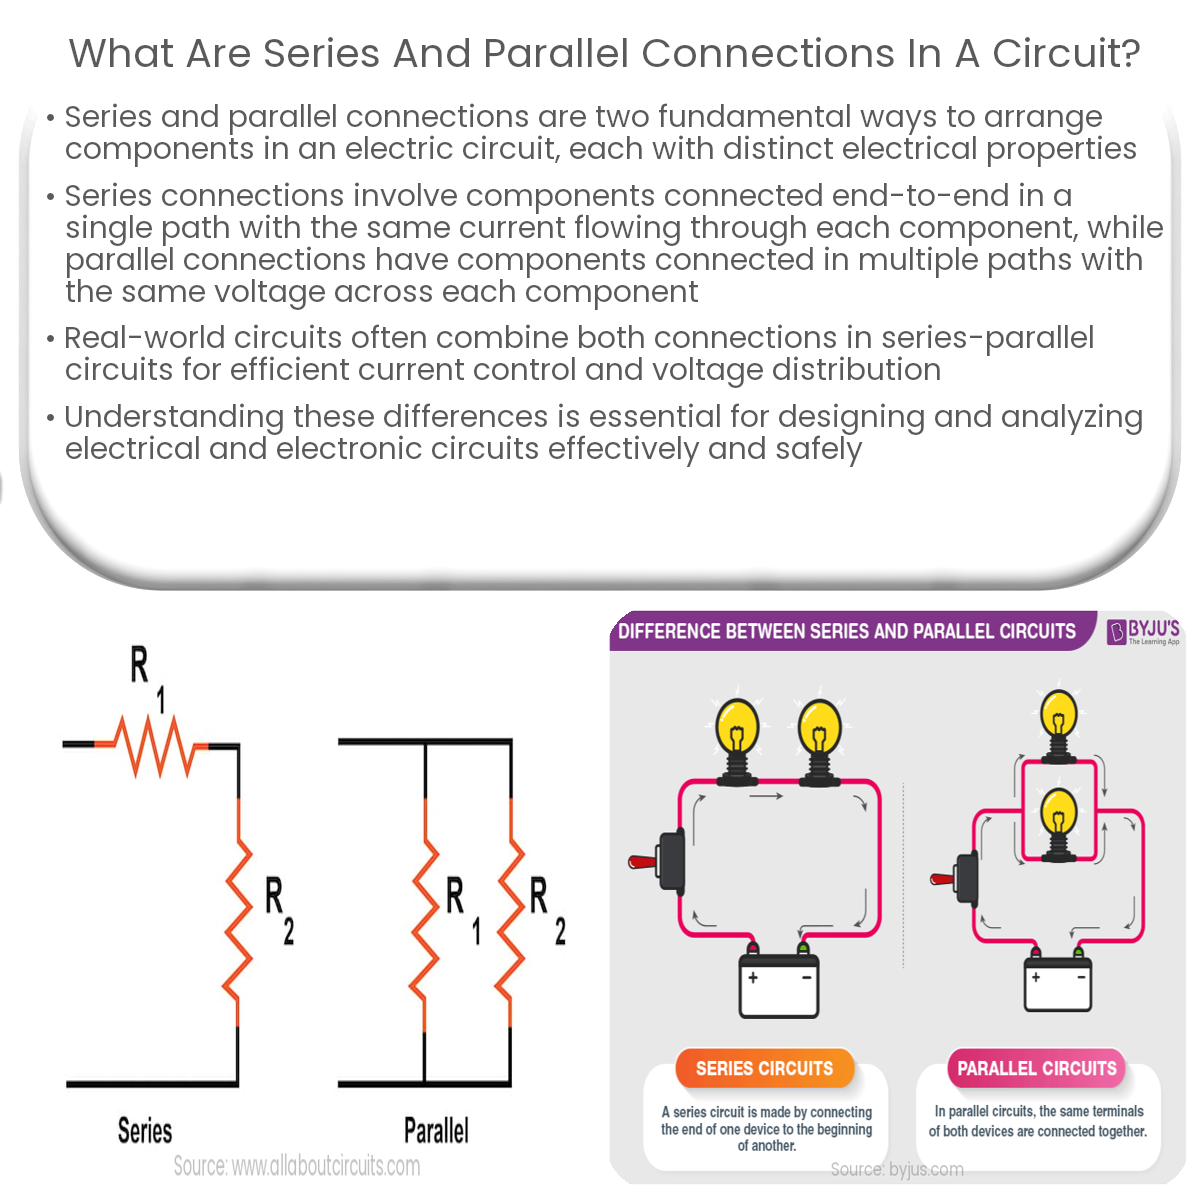 What are series and parallel connections in a circuit?